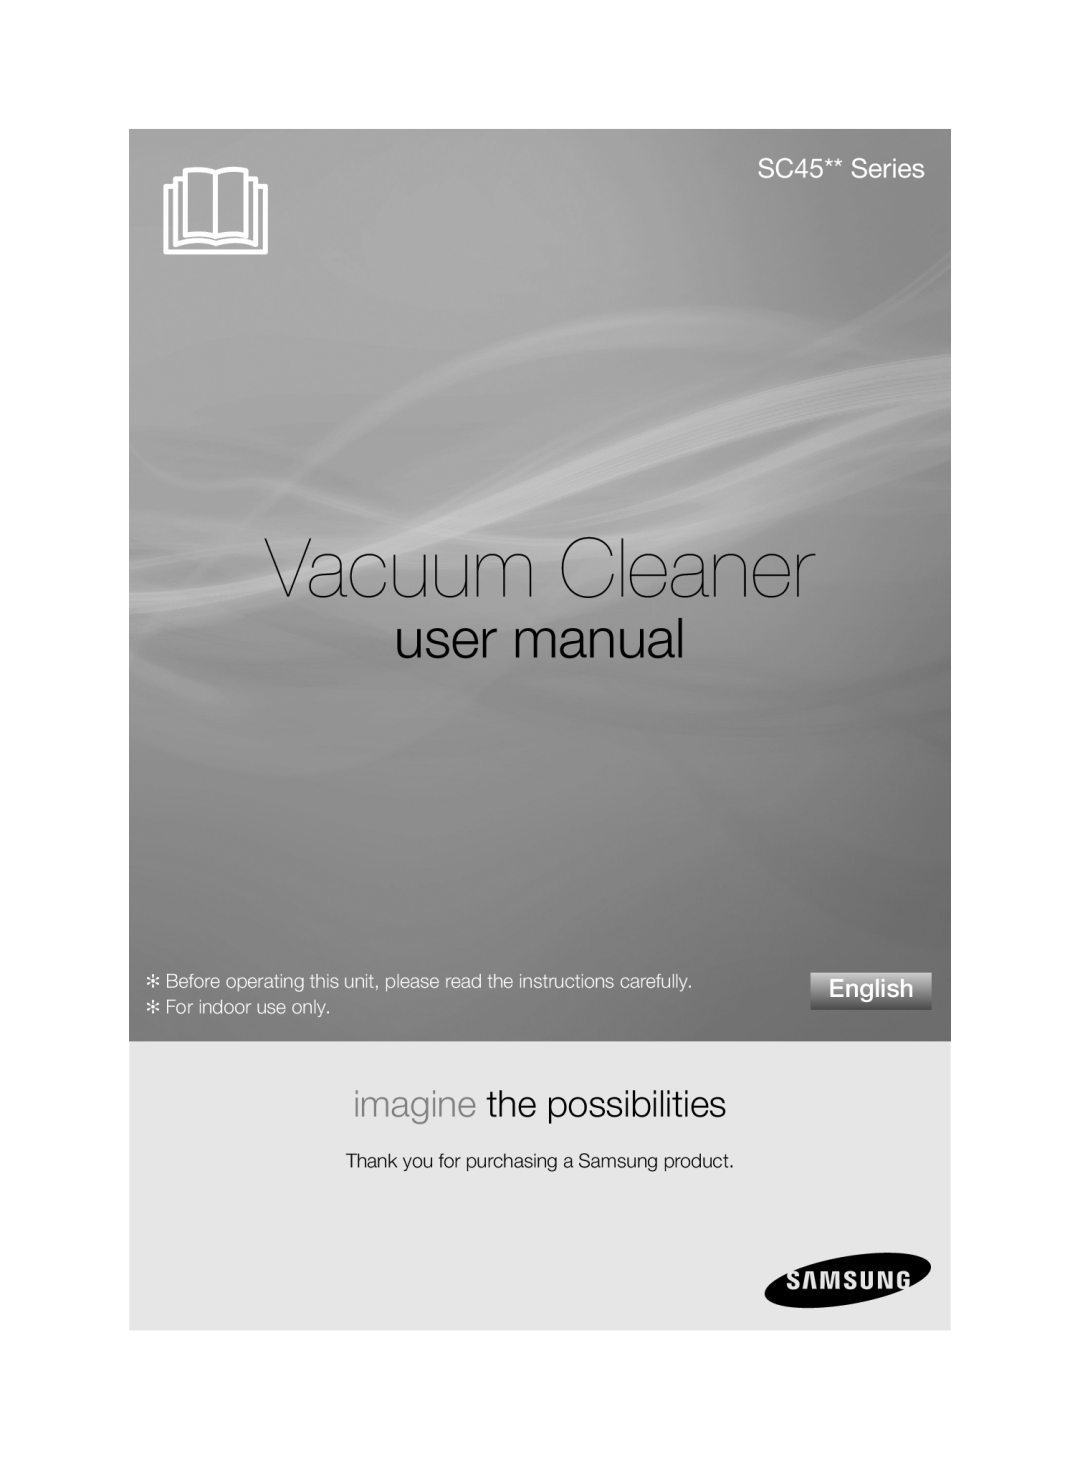 Samsung VCC45W0S3B/XEP, VCC45S0S3R/XEF manual Vacuum Cleaner, user manual, SC45** Series, English, For indoor use only 